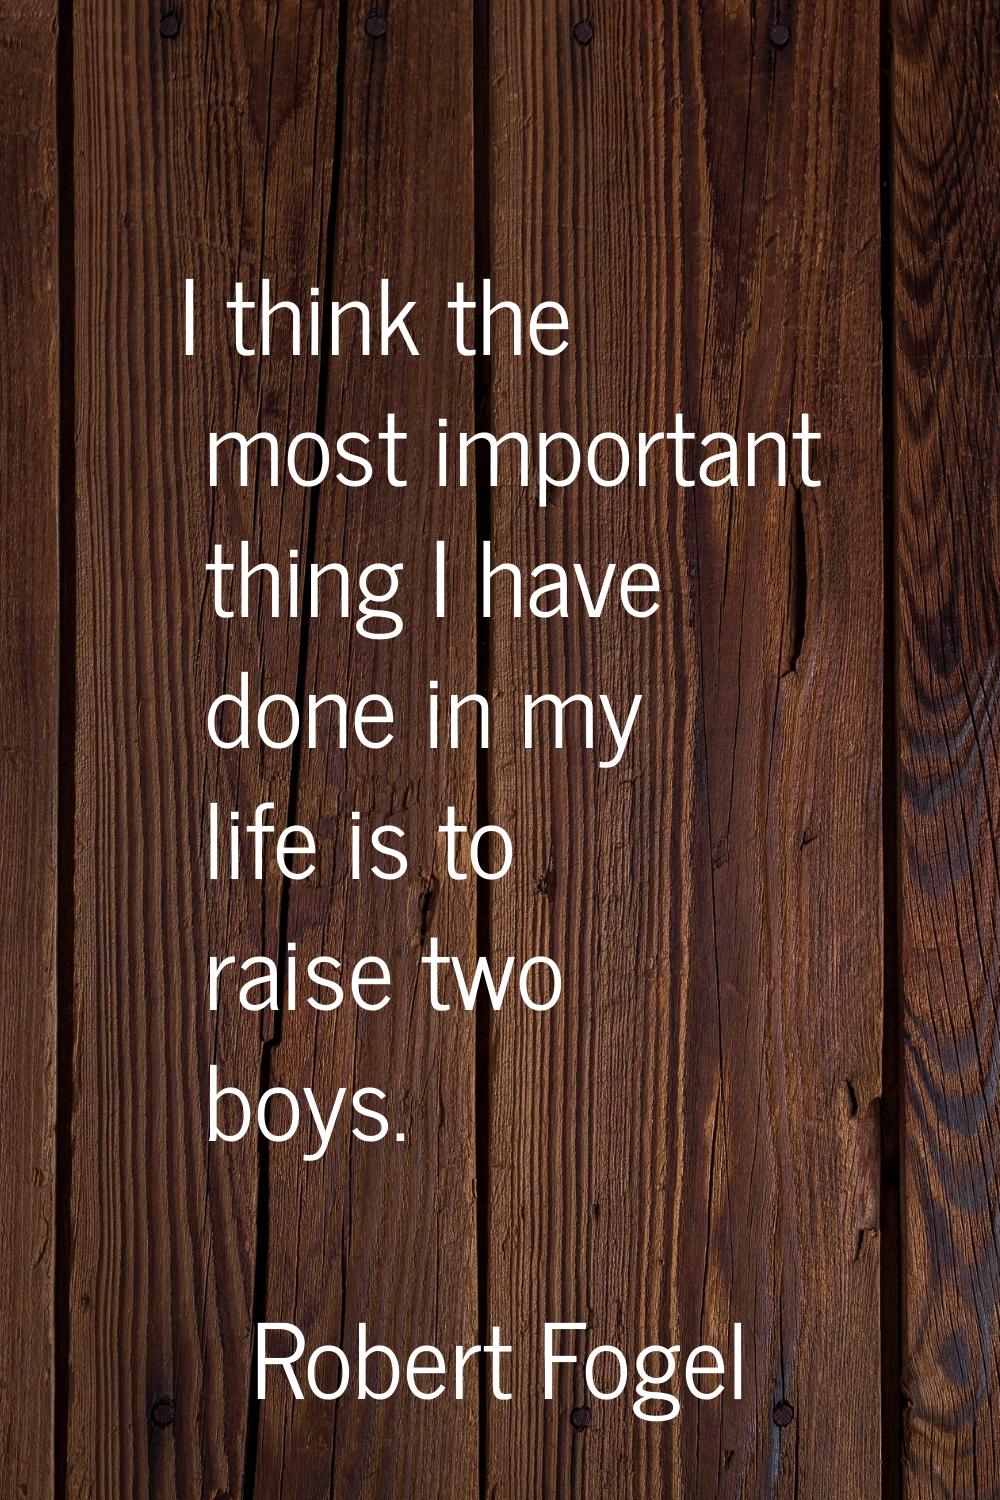 I think the most important thing I have done in my life is to raise two boys.